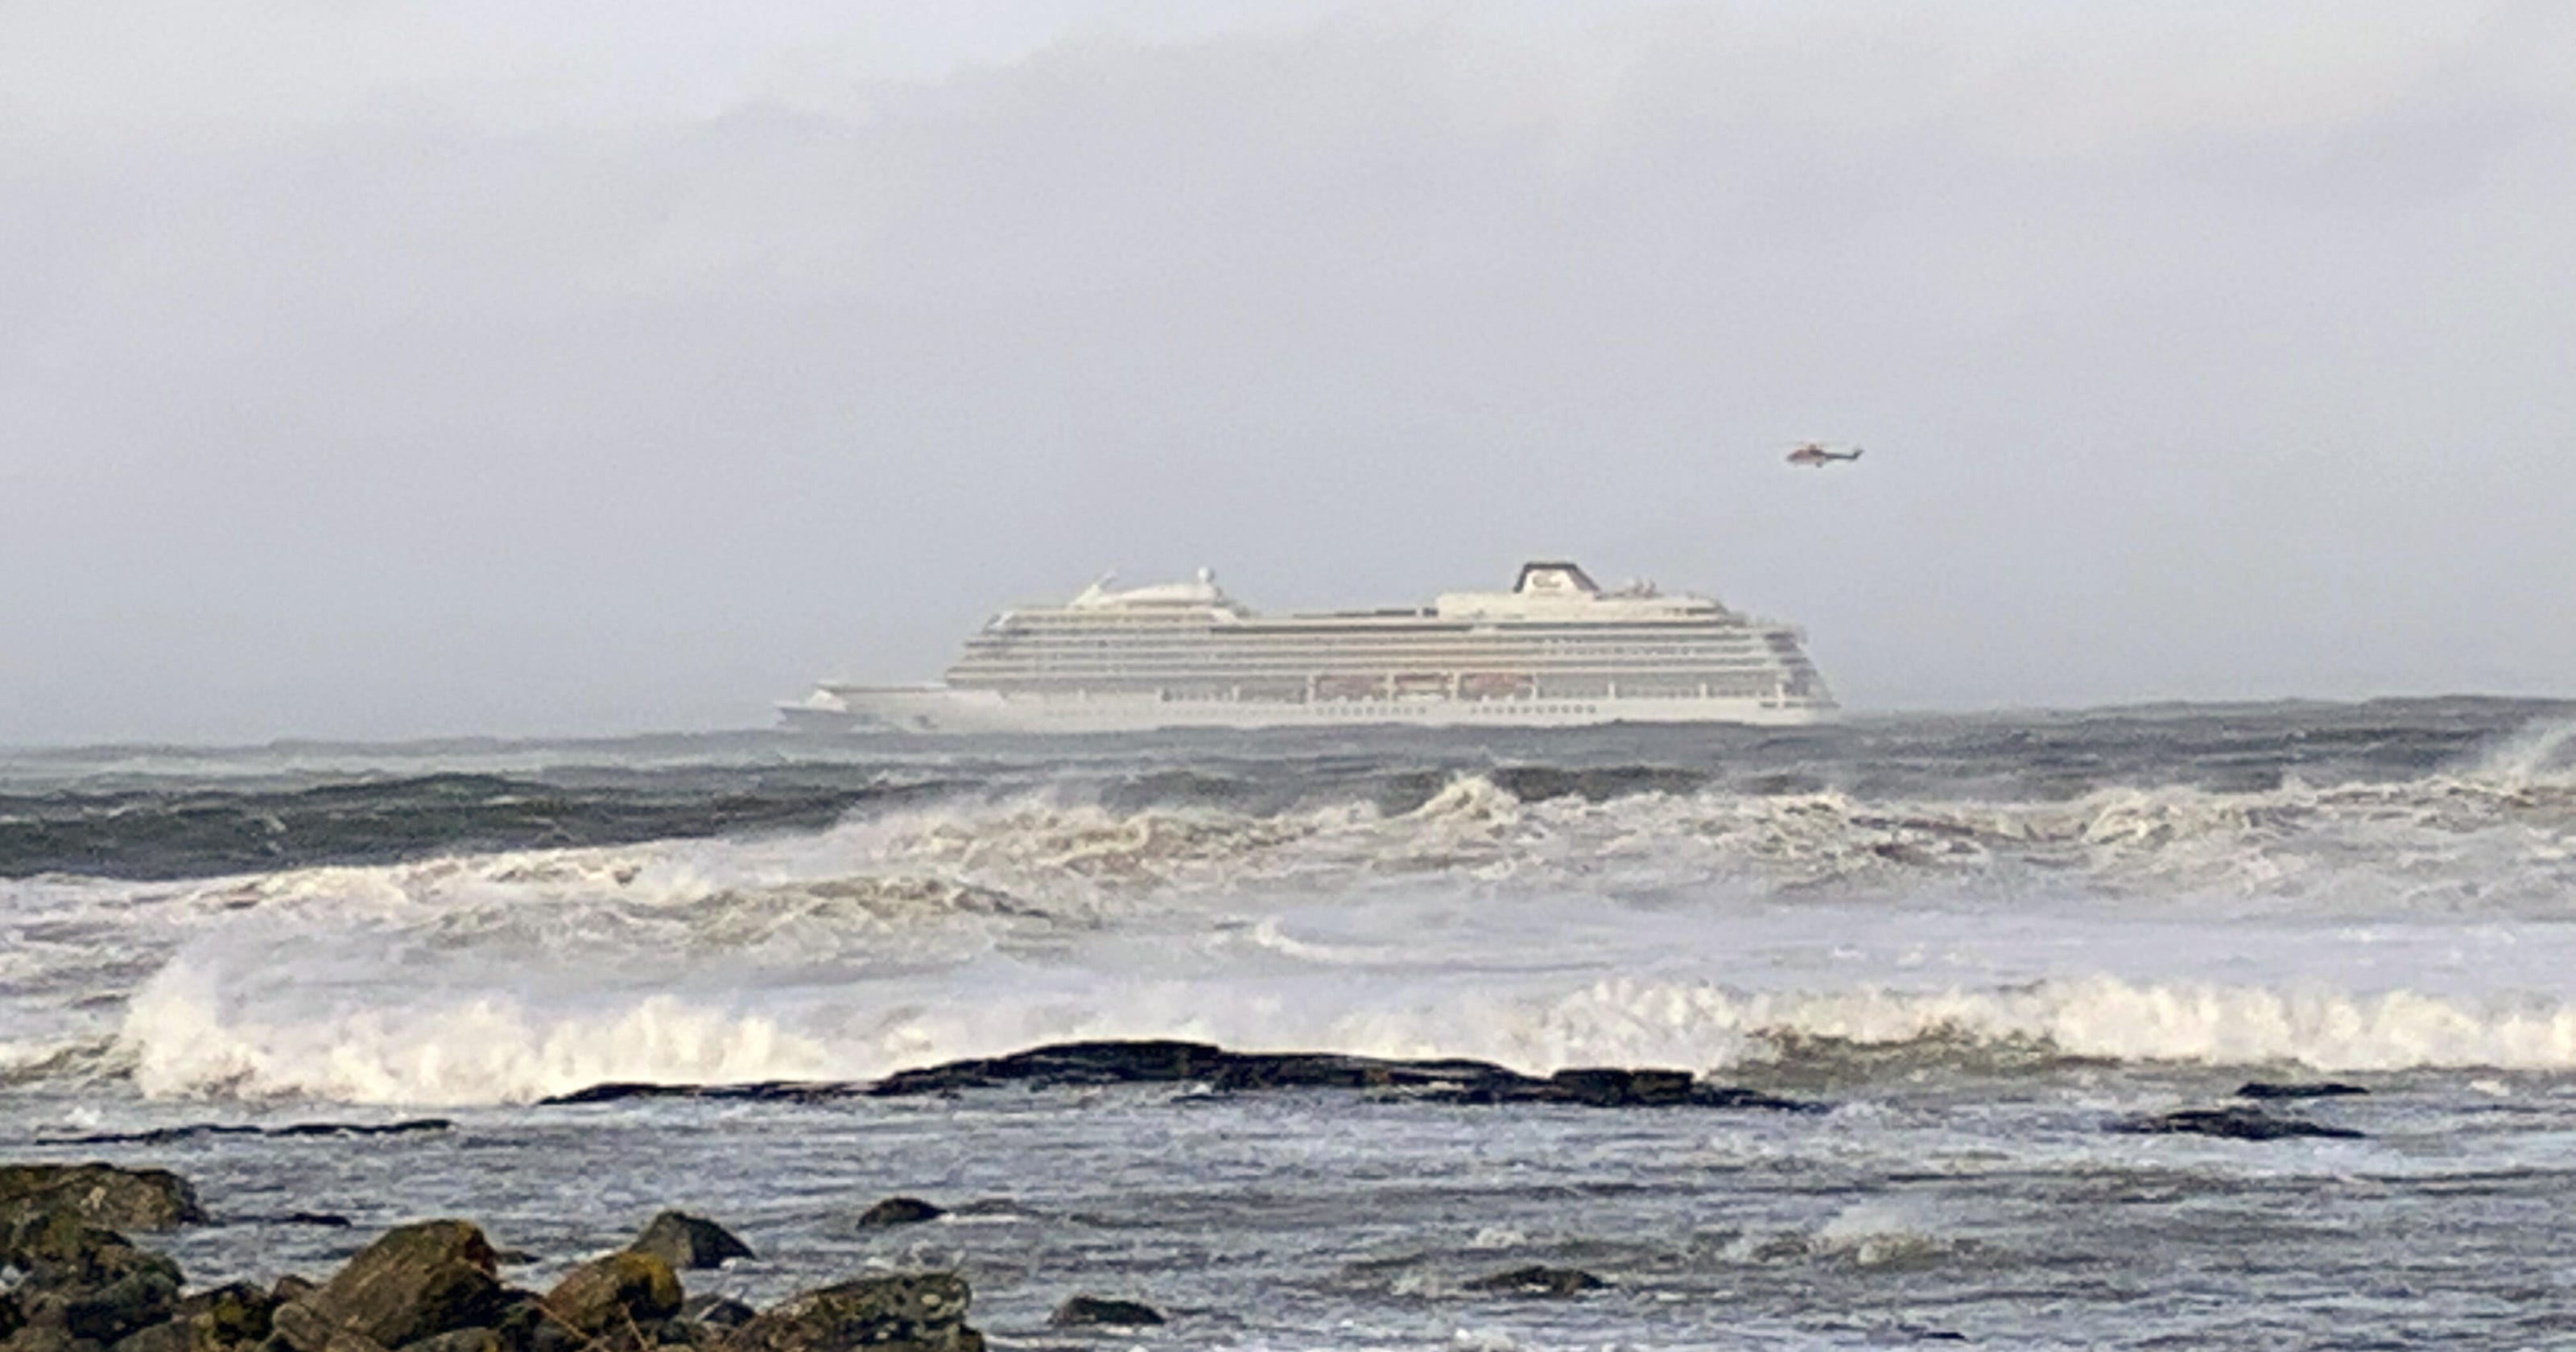 Cruise ship has engine problems off Norway, sends distress signal